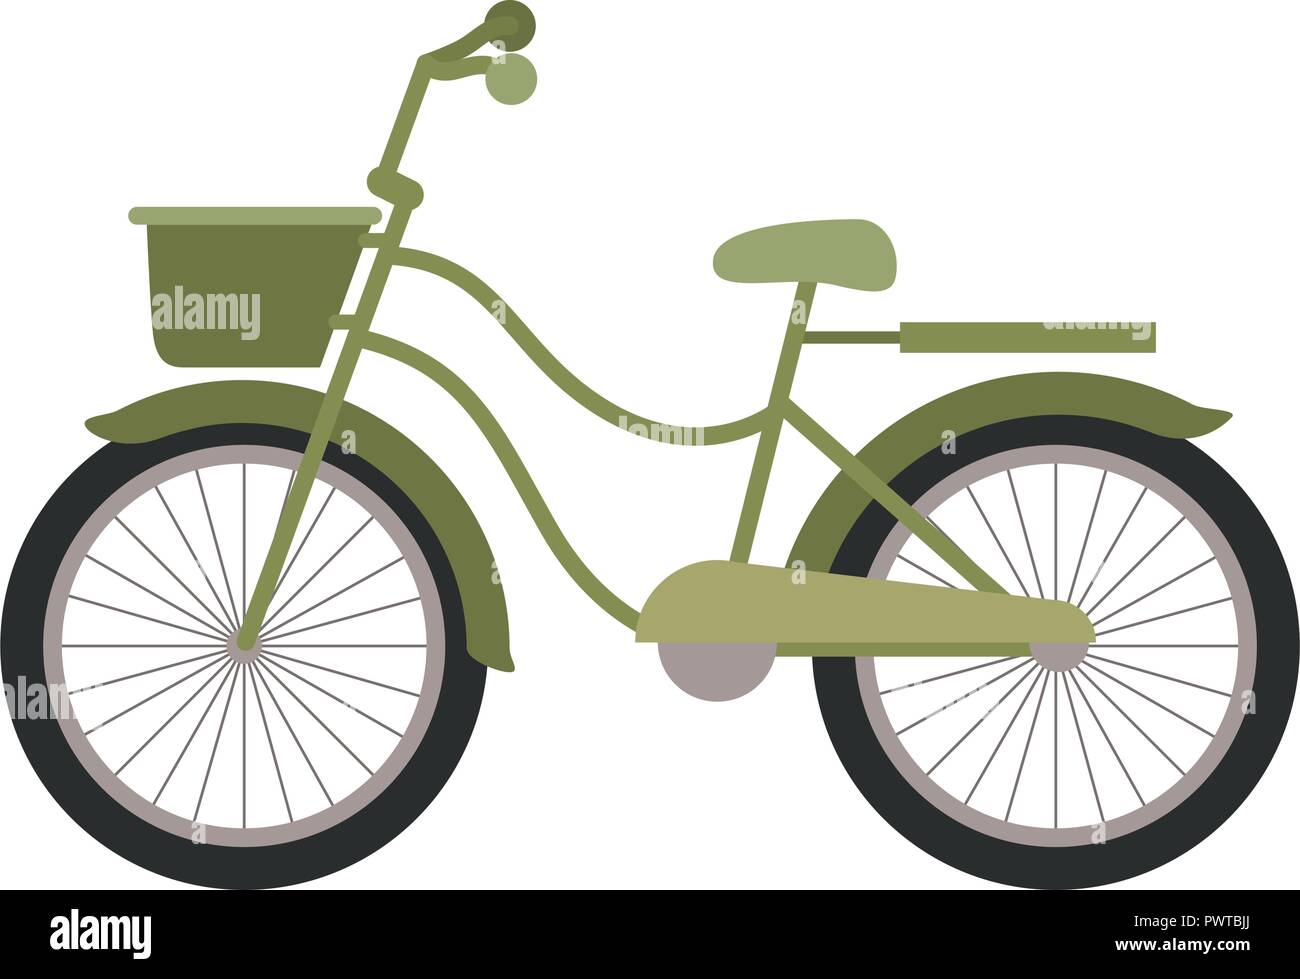 bicycle vehicle isolated icon Stock Vector